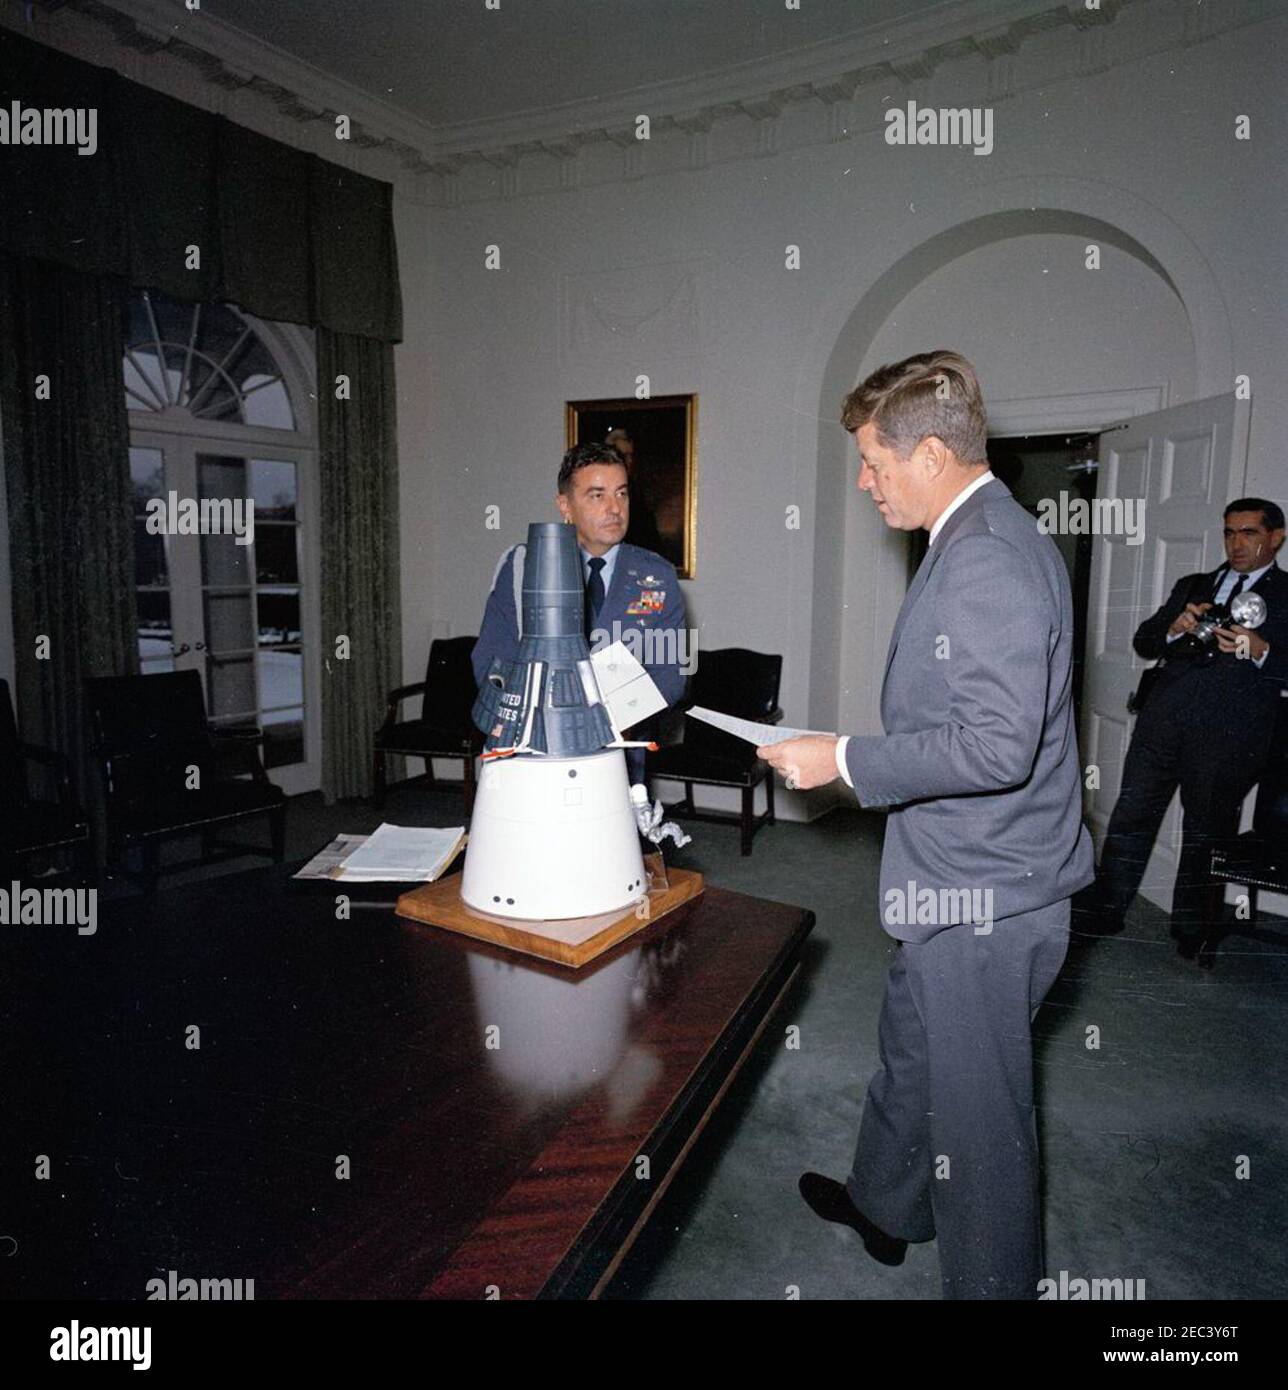 President Kennedy with a model Gemini Capsule. President John F. Kennedy views a scale model of a Gemini capsule in the Cabinet Room of the White House, Washington, D.C.; the model was given to President Kennedy as a Christmas gift from the personnel of McDonnell Aircraft Corporation, following the Presidentu2019s visit to McDonnellu2019s St. Louis plant on 12 September 1962. Air Force Aide to the President, Brigadier General Godfrey T. McHugh, stands at left; White House Photographer, Chief Robert L. Knudsen, stands at right. [See also MO 63.1922a-c, u0022Scale Model of the Gemini Spacecra Stock Photo